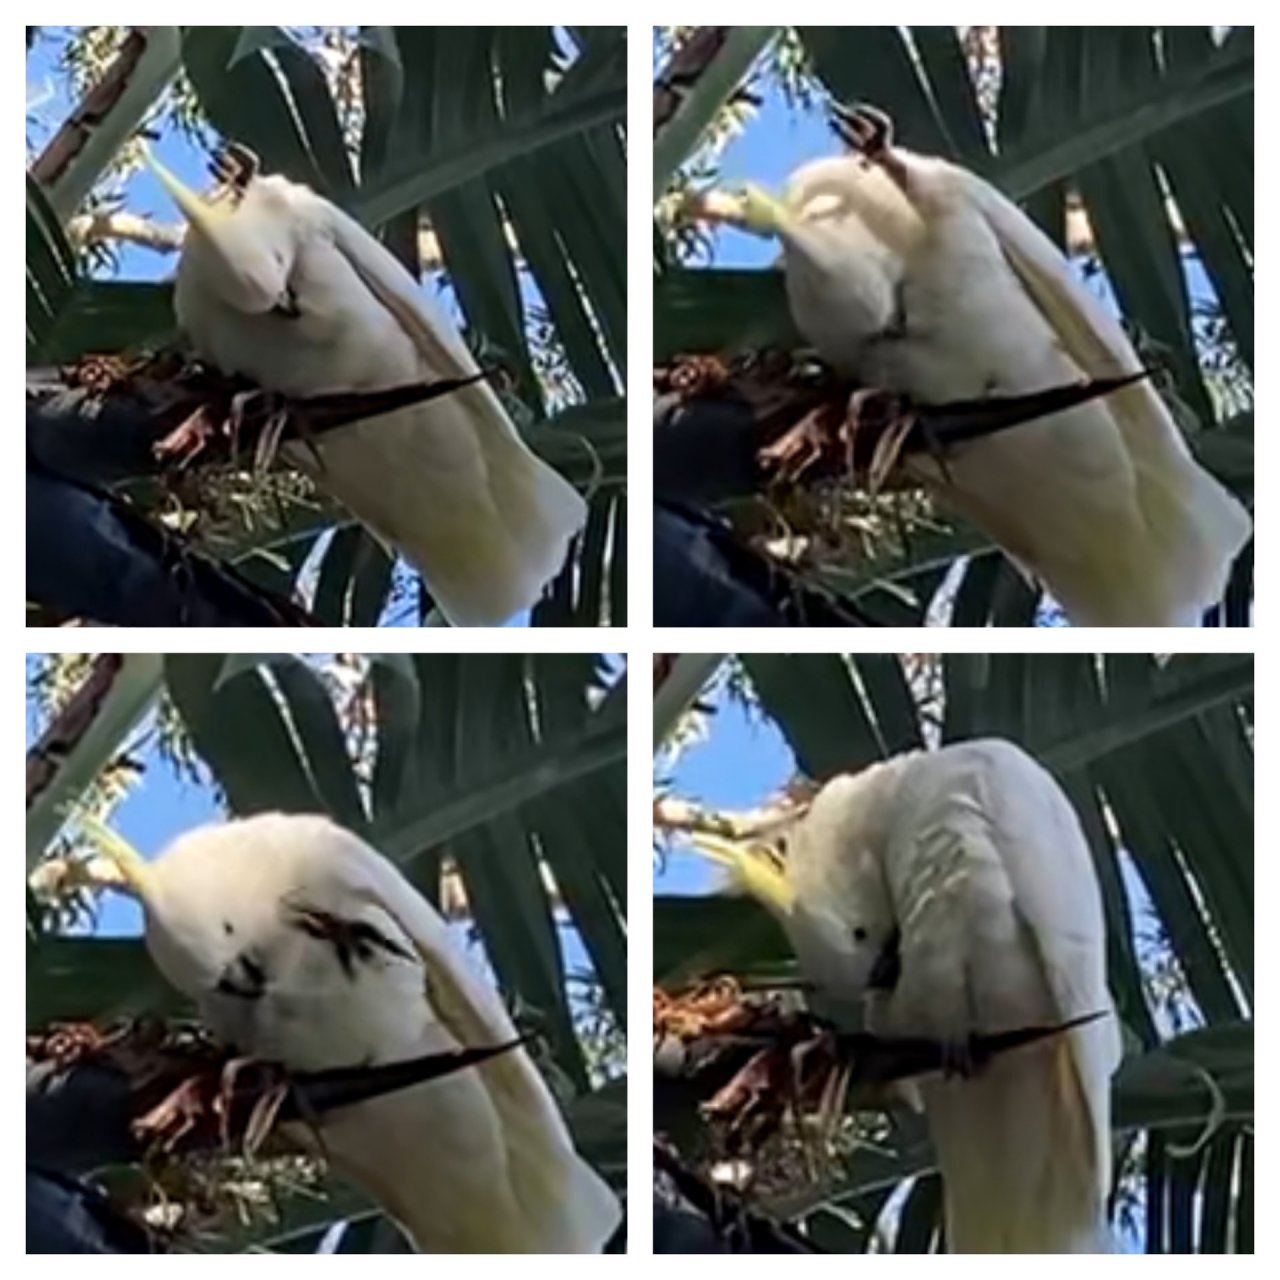 Sulphur-crested Cockatoo in Big City Birds App spotted by ednaward on 05.02.2021